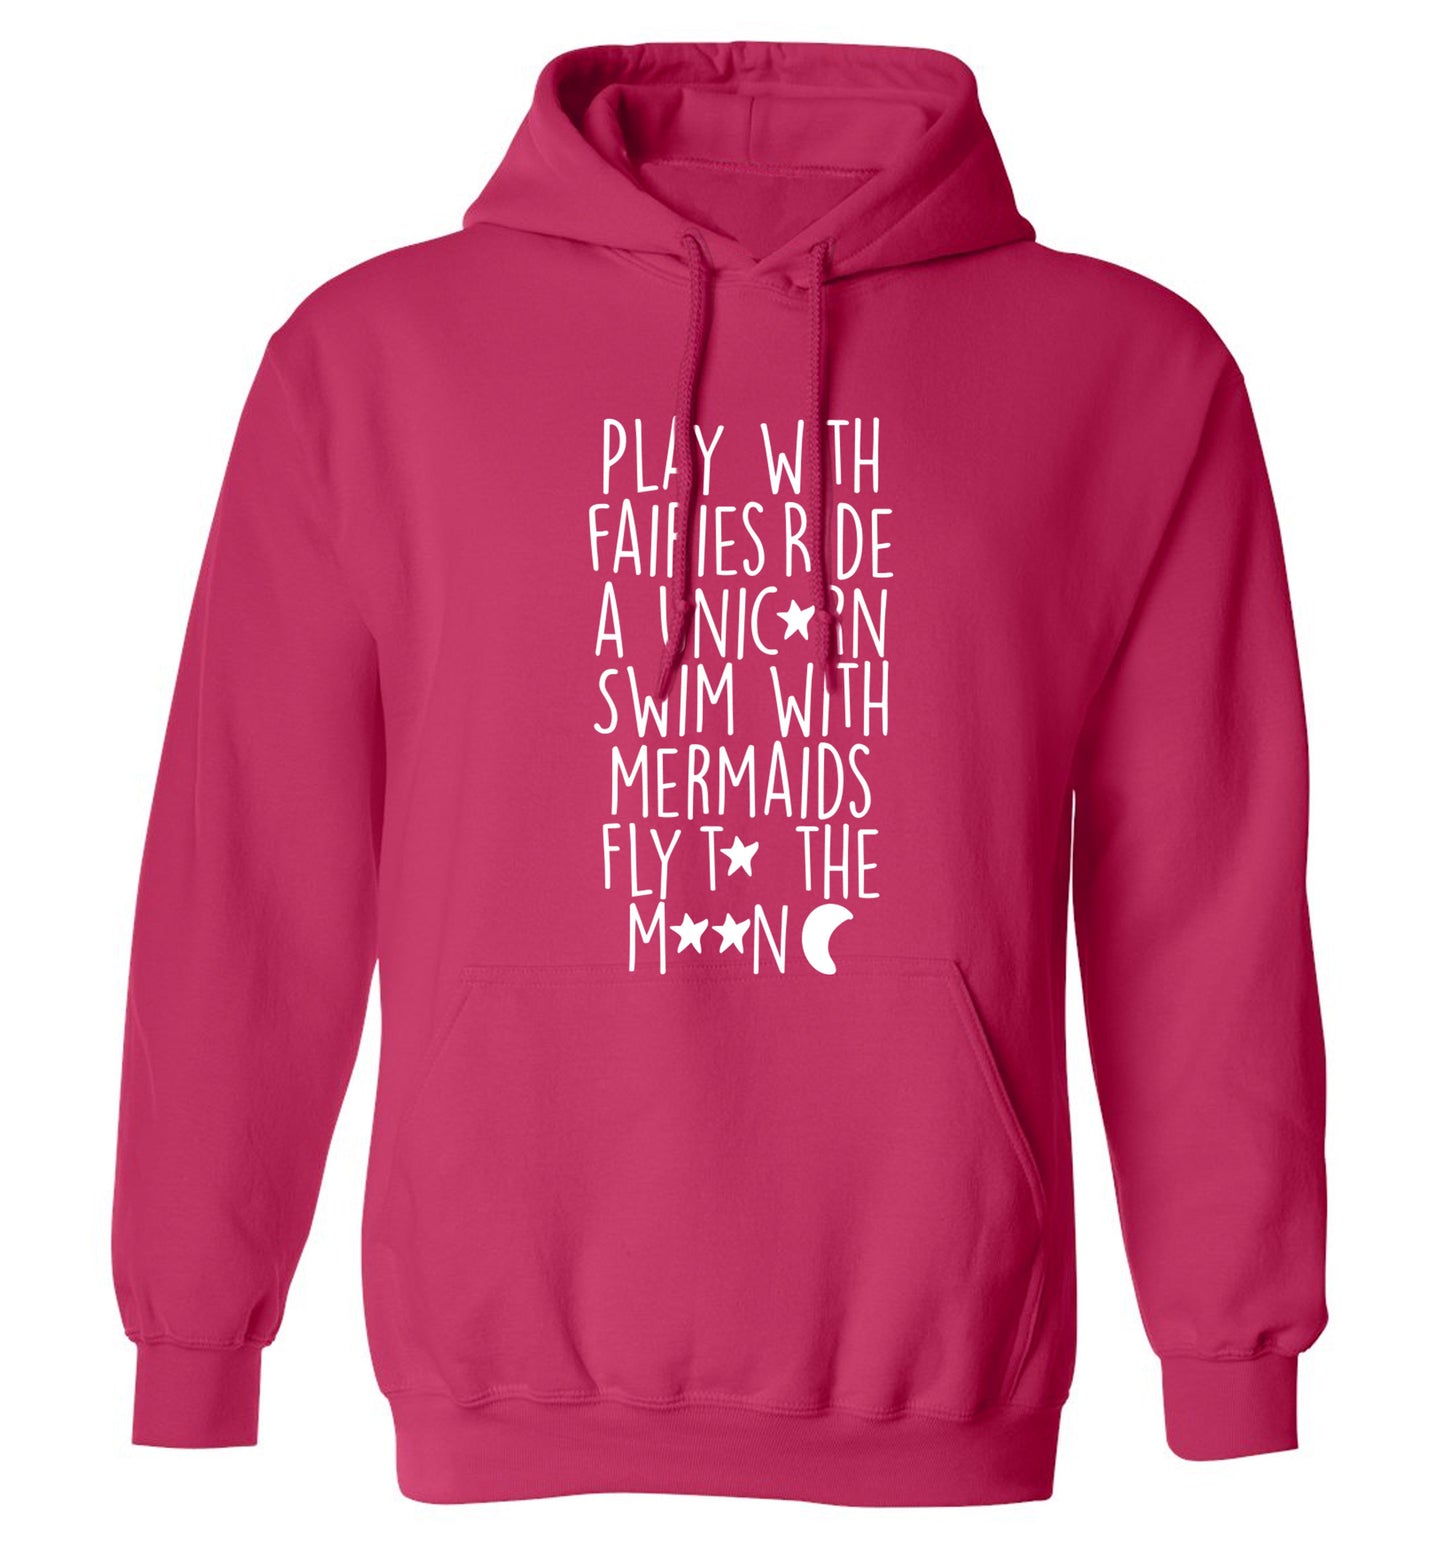 Play with fairies ride a unicorn swim with mermaids fly to the moon adults unisex pink hoodie 2XL